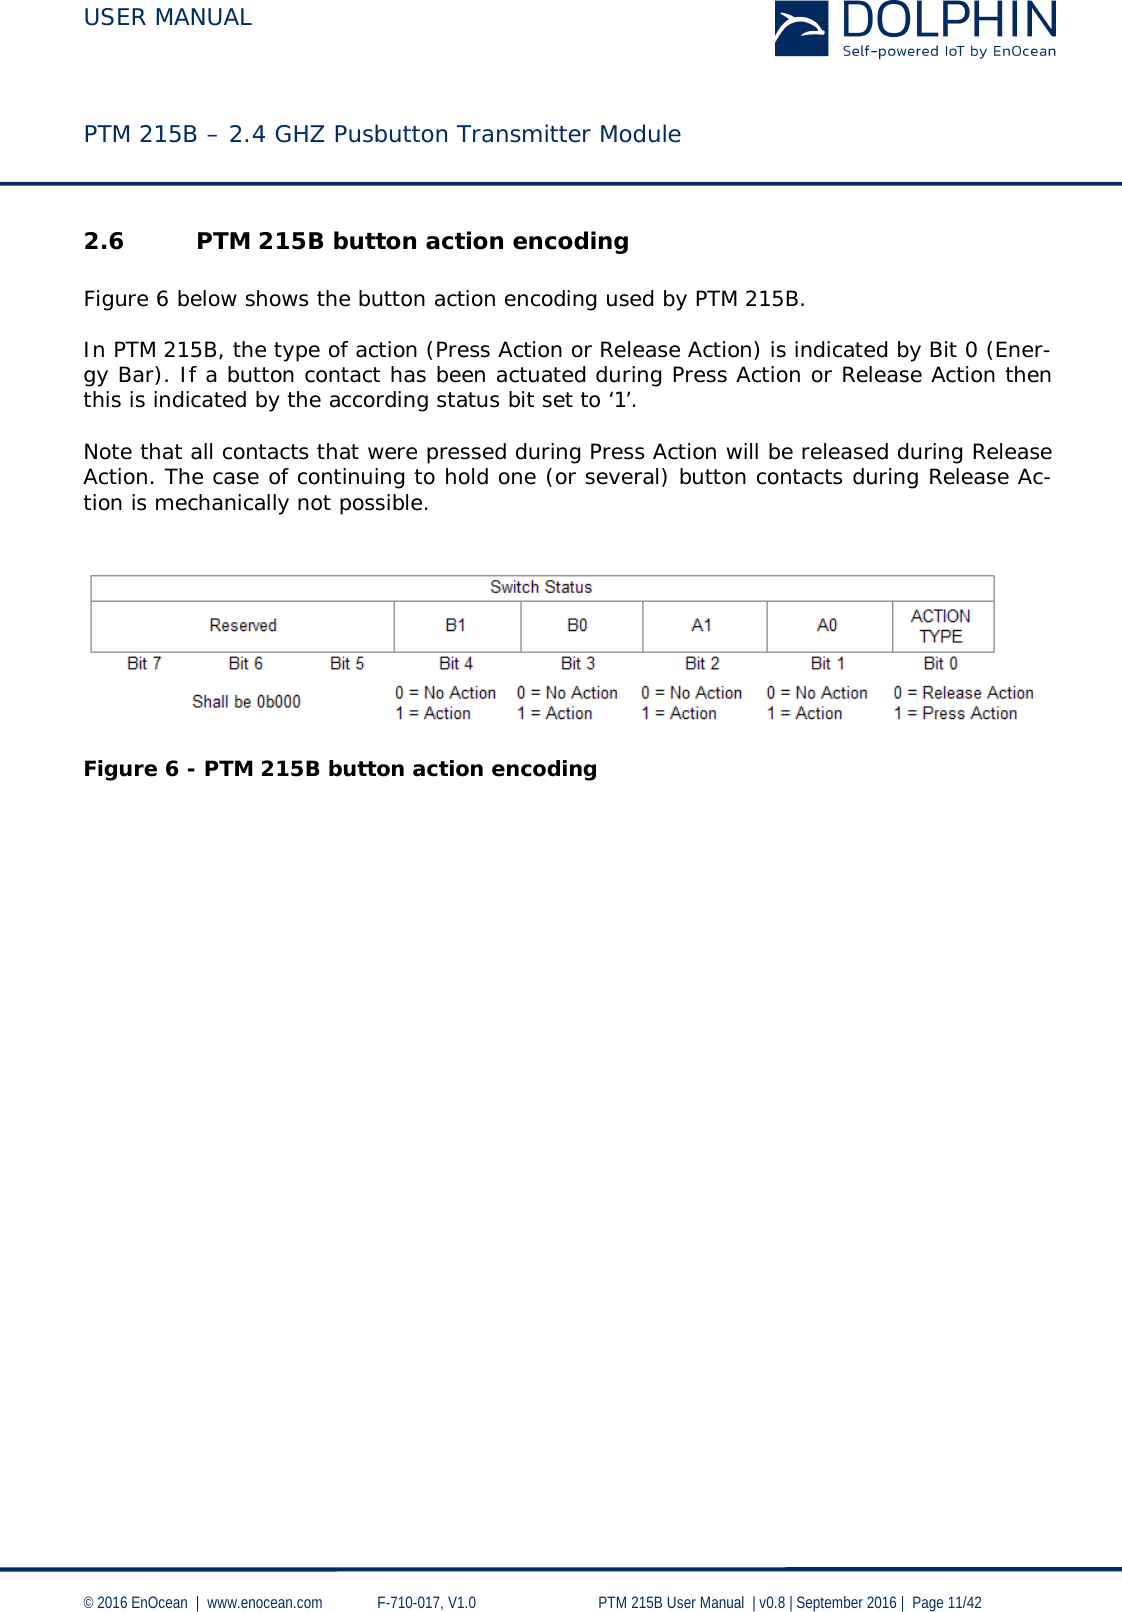  USER MANUAL    PTM 215B – 2.4 GHZ Pusbutton Transmitter Module  © 2016 EnOcean  |  www.enocean.com   F-710-017, V1.0        PTM 215B User Manual  | v0.8 | September 2016 |  Page 11/42  2.6 PTM 215B button action encoding  Figure 6 below shows the button action encoding used by PTM 215B.   In PTM 215B, the type of action (Press Action or Release Action) is indicated by Bit 0 (Ener-gy Bar). If a button contact has been actuated during Press Action or Release Action then this is indicated by the according status bit set to ‘1’.   Note that all contacts that were pressed during Press Action will be released during Release Action. The case of continuing to hold one (or several) button contacts during Release Ac-tion is mechanically not possible.     Figure 6 - PTM 215B button action encoding     